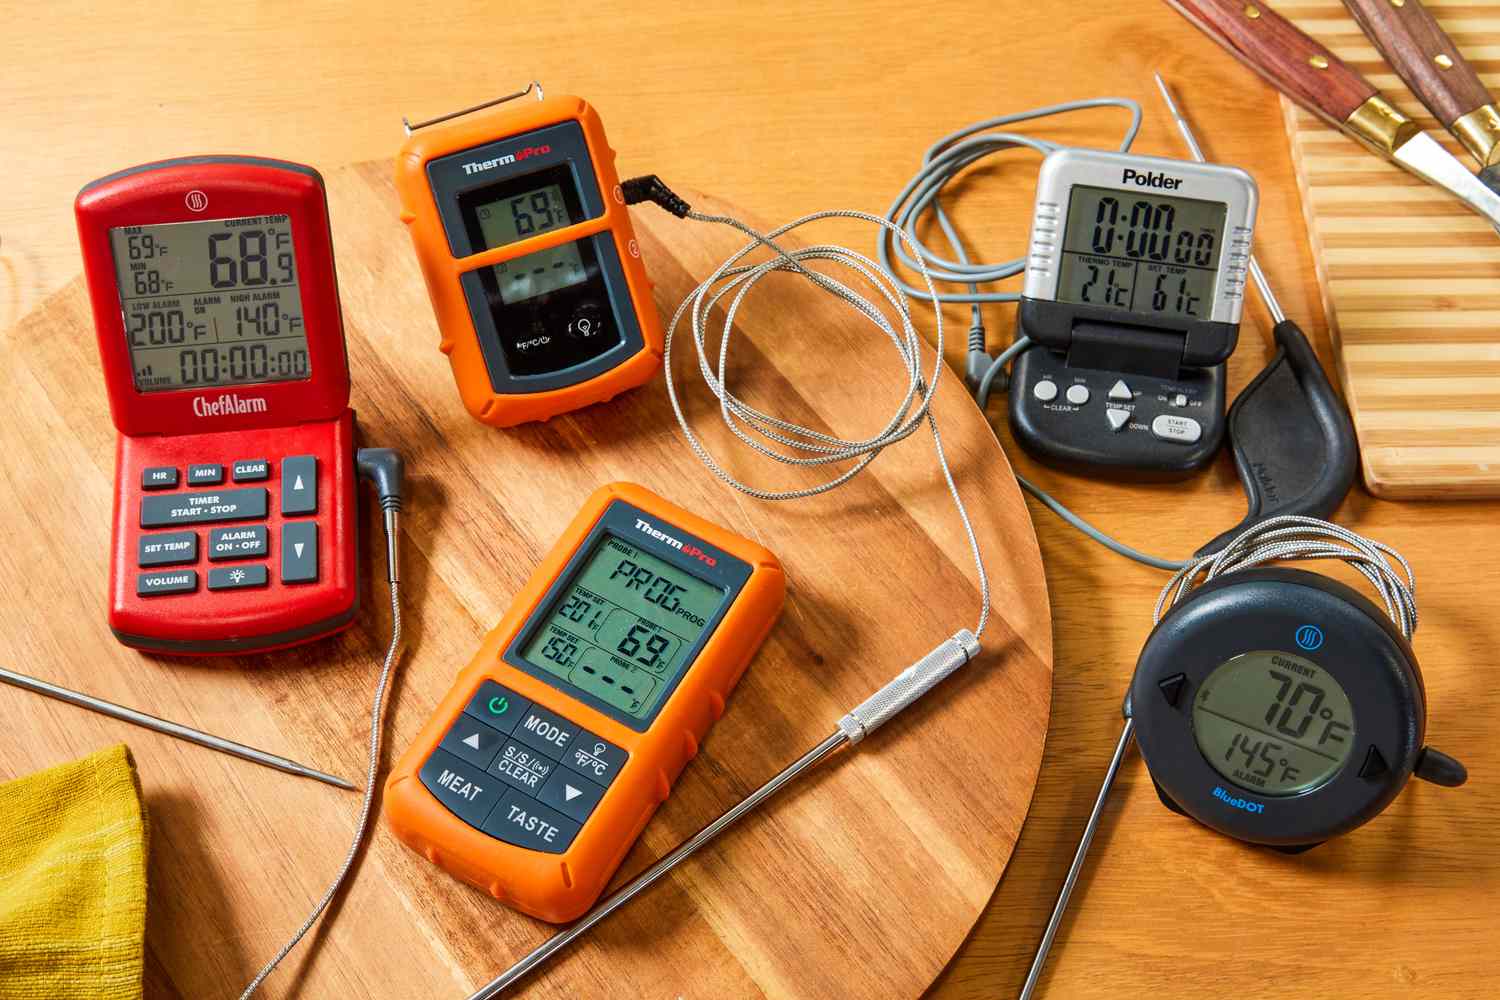 four probe thermometers on a wooden table